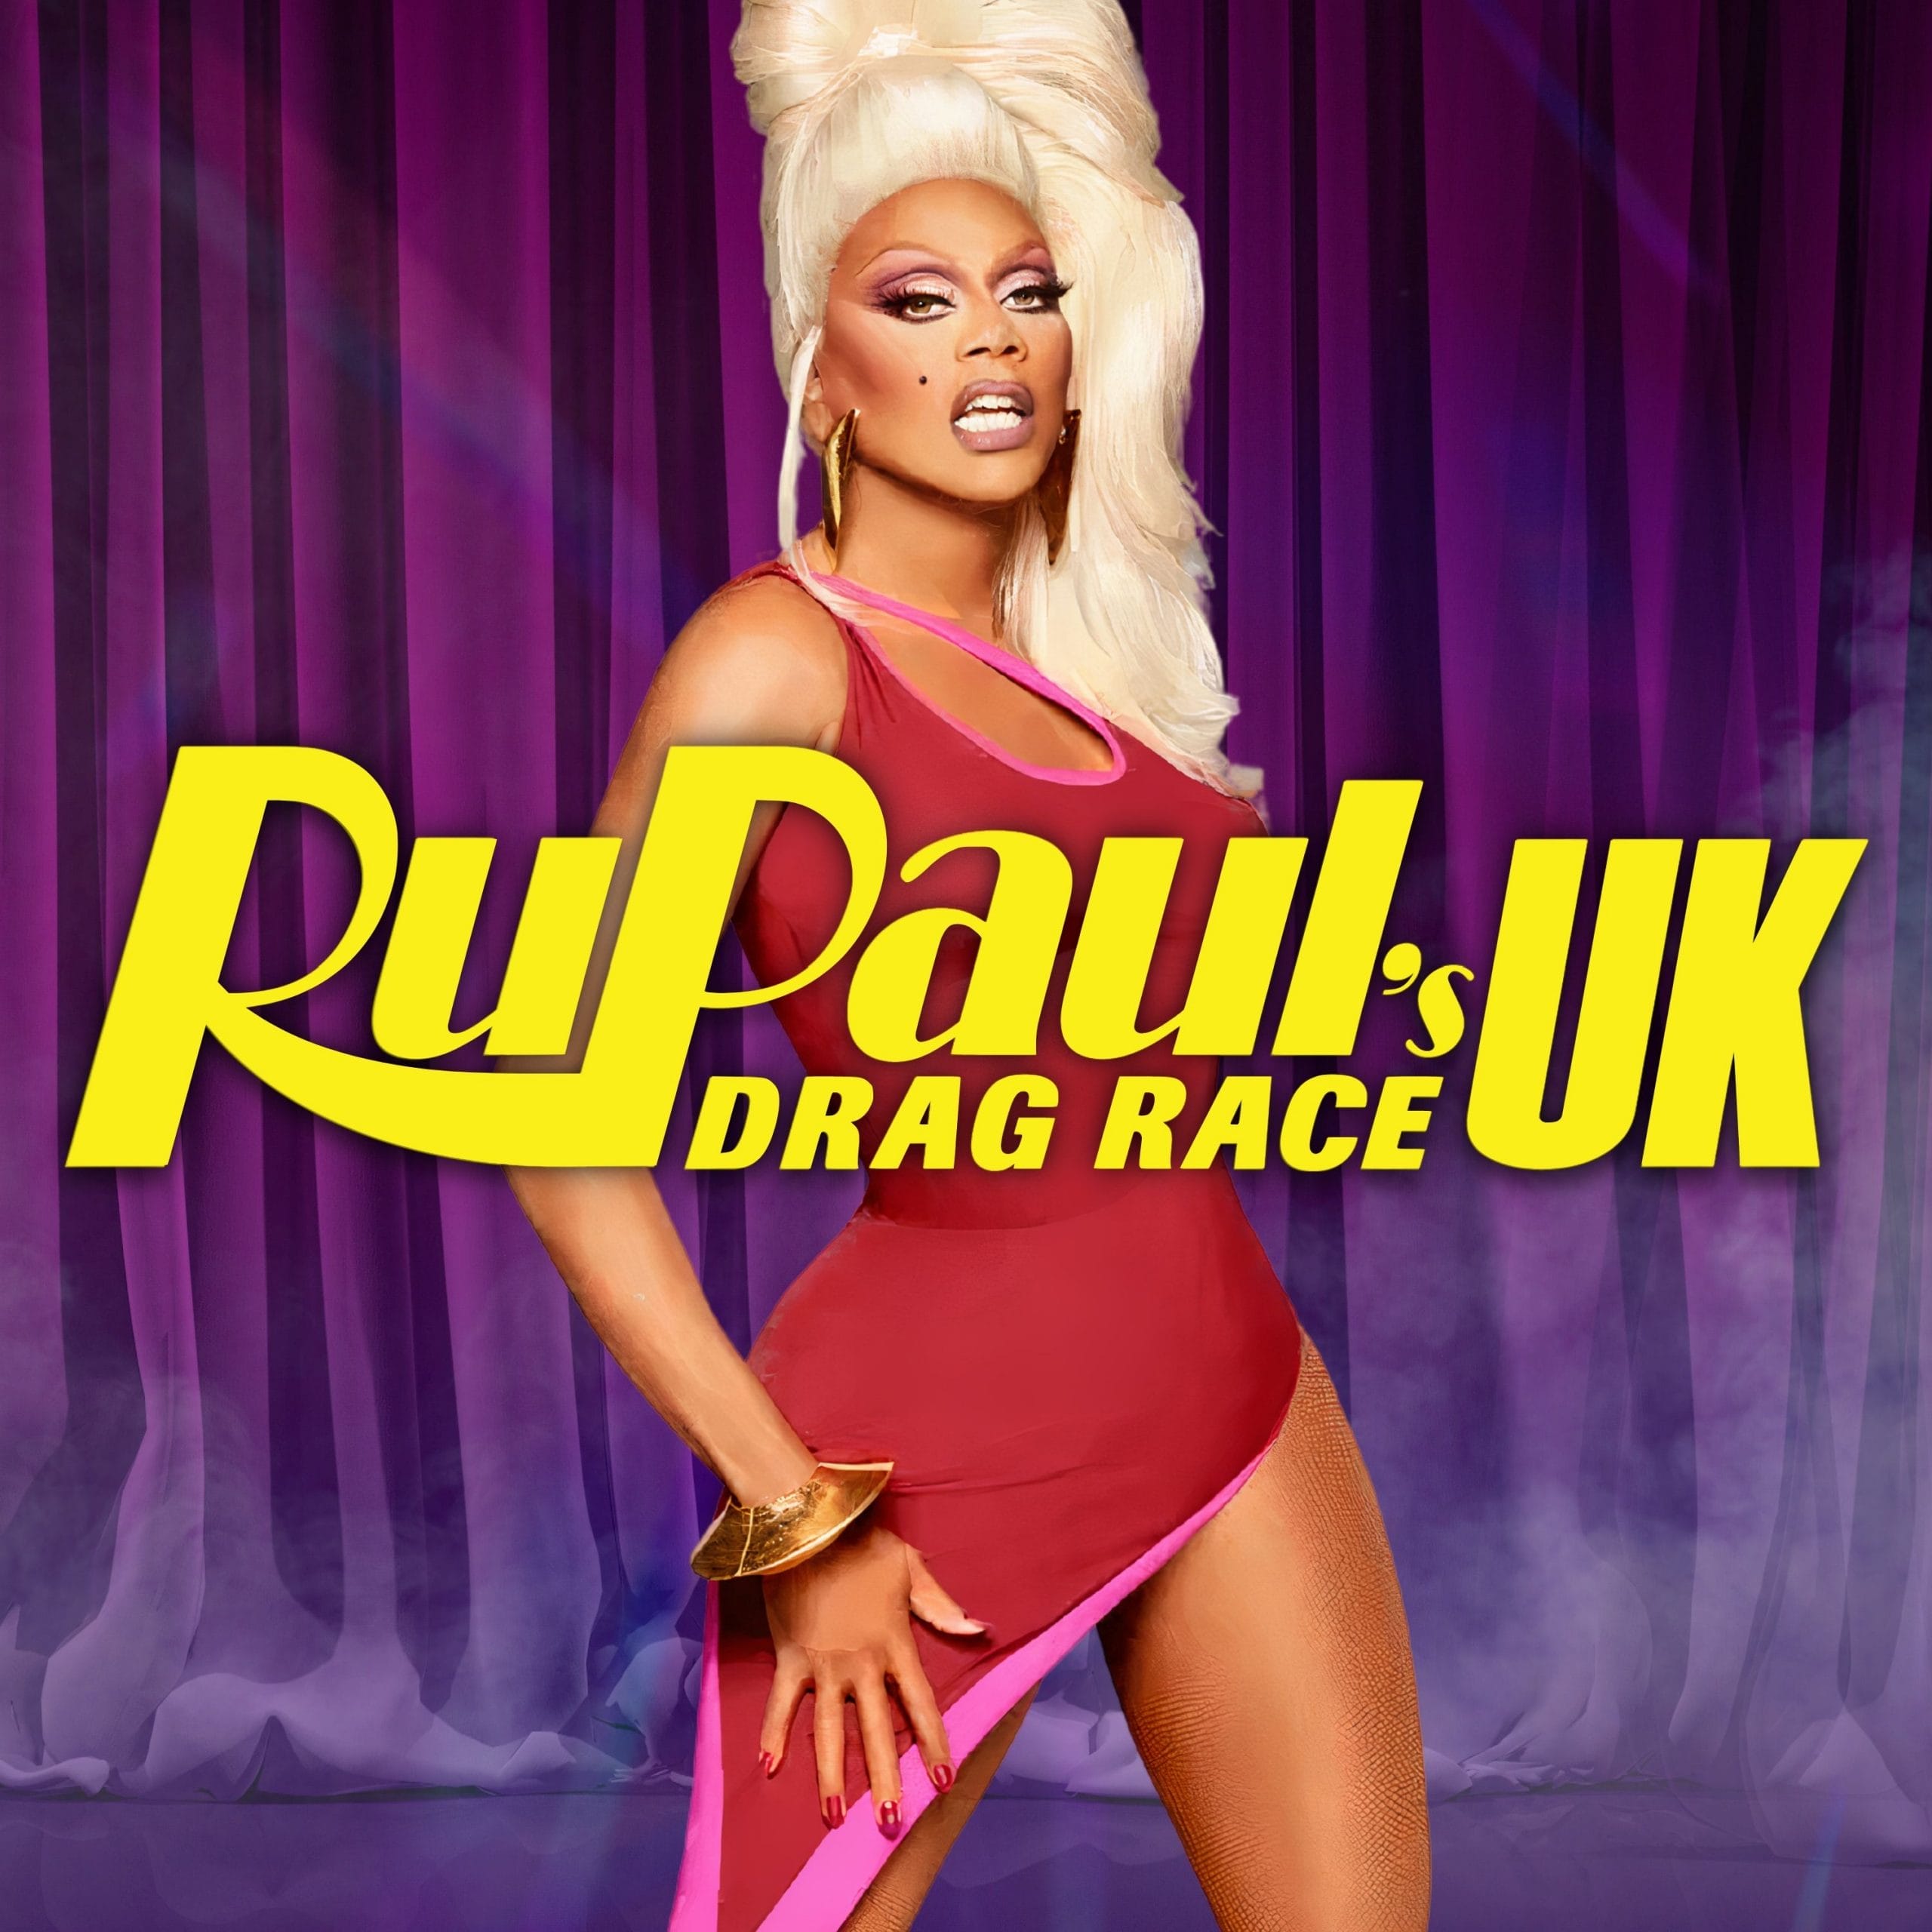 RuPaul, like the American version, has multiple duties on the show, including host, mentor, and judge. RuPaul serves as presenter, introducing famous guests, announcing the obstacles the queens will face each week, and revealing who will be eliminated from the competition. RuPaul's function as a coach is to guide the participants through each challenge, while his position as a judge is to criticise the queens' overall execution of the competition. The second season of RuPaul's Drag Race UK premiered on the BBC Three portion of BBC iPlayer and the WOW Presents Plus streaming service on January 14, 2021. On November 15, 2019, the series was confirmed, and casting was completed. Due to the COVID-19 pandemic, production was halted in mid-2020, but resumed in late-2020. On December 16, 2020, the cast of 12 new queens was revealed, and the show premiered on January 14, 2021. Looking for more seasons of Drag Race, then we have recently launched DRAG RACE SEASON 13 here for you. Episodes of Drag Race UK Season 2 Episode 1 RuPaul's Drag Race UK, which has won numerous awards, is back for a second season. Twelve of the country's most fabulous drag queens will battle for the title of UK's Next Drag Race Superstar over the course of ten weeks. The queens enter the workroom for the first time in the inaugural episode and promptly take on their first challenge: a tennis photograph. The queens must serve two looks on the runway for the main challenge. As the first queen sashays away from the competition, actress and fashion legend Elizabeth Hurley joins Michelle Visage and Graham Norton on the judging panel. Episode 2 The queens discuss what happened on last week's show after Joe Black is eliminated. The contestants must elect a Drag Race cabinet in the categories of Secretary of Shade, Trade Minister, Leader of the House of Loading It Up, and Baroness Basic for the mini challenge. A'Whora, Tayce, Lawrence Chaney, and Tia Kofi were the winners in those categories, respectively. Episode 3 The queens had to limbo in rapid drag in the little task at the start of the episode. The queens choose their drag sister for the major task. The queens had to create looks using the same colours and textiles as their drag sister in five teams of two. The colours were assigned to the duos by the victors of the mini challenge, Tayce and Veronica Green. Episode 4 In the Great British Fake-Off, the queens had to present a cake as if it were their own in a little challenge. Bimini Bon-Boulash won the mini challenge and was entitled to select her own part for the major challenge as a result. The queens' main objective was to co-host a brand new daytime television show called Morning Glory. Episode 5 The queens returned to the competition after a seven-month lockdown break, with the exception of Veronica Green, who was forced to withdraw from the programme after testing positive for COVID-19, despite receiving an open offer to return for Season 3. The previously ousted queens, with the exception of Ginny Lemon, returned to compete for a chance to return to the competition. Joe Black was voted by the majority to return to the competition after each queen made her case to the other candidates. Episode 6 The queens discuss what happened on last week's show after Joe Black is eliminated. In the primary task, participants had to show off their finest celebrity impersonations in the Snatch Game, which was hosted by Michelle Visage and Gemma Collins. Tia Kofi portrayed Mel B, Sister Sister portrayed Sally Morgan, Lawrence Chaney portrayed Miriam Margolyes, Ellie Diamond portrayed Matt Lucas as Vicky Pollard from Little Britain, Tayce portrayed Kath Day-Knight from Kath & Kim, A'Whora portrayed Louie Spence, and Bimini Bon-Boulash portrayed Katie Price. Wrapping Up Following her removal from the second series due to a positive COVID-19 test, Veronica Green was given an open invitation to the third series and competed in it. She came in tenth place overall.